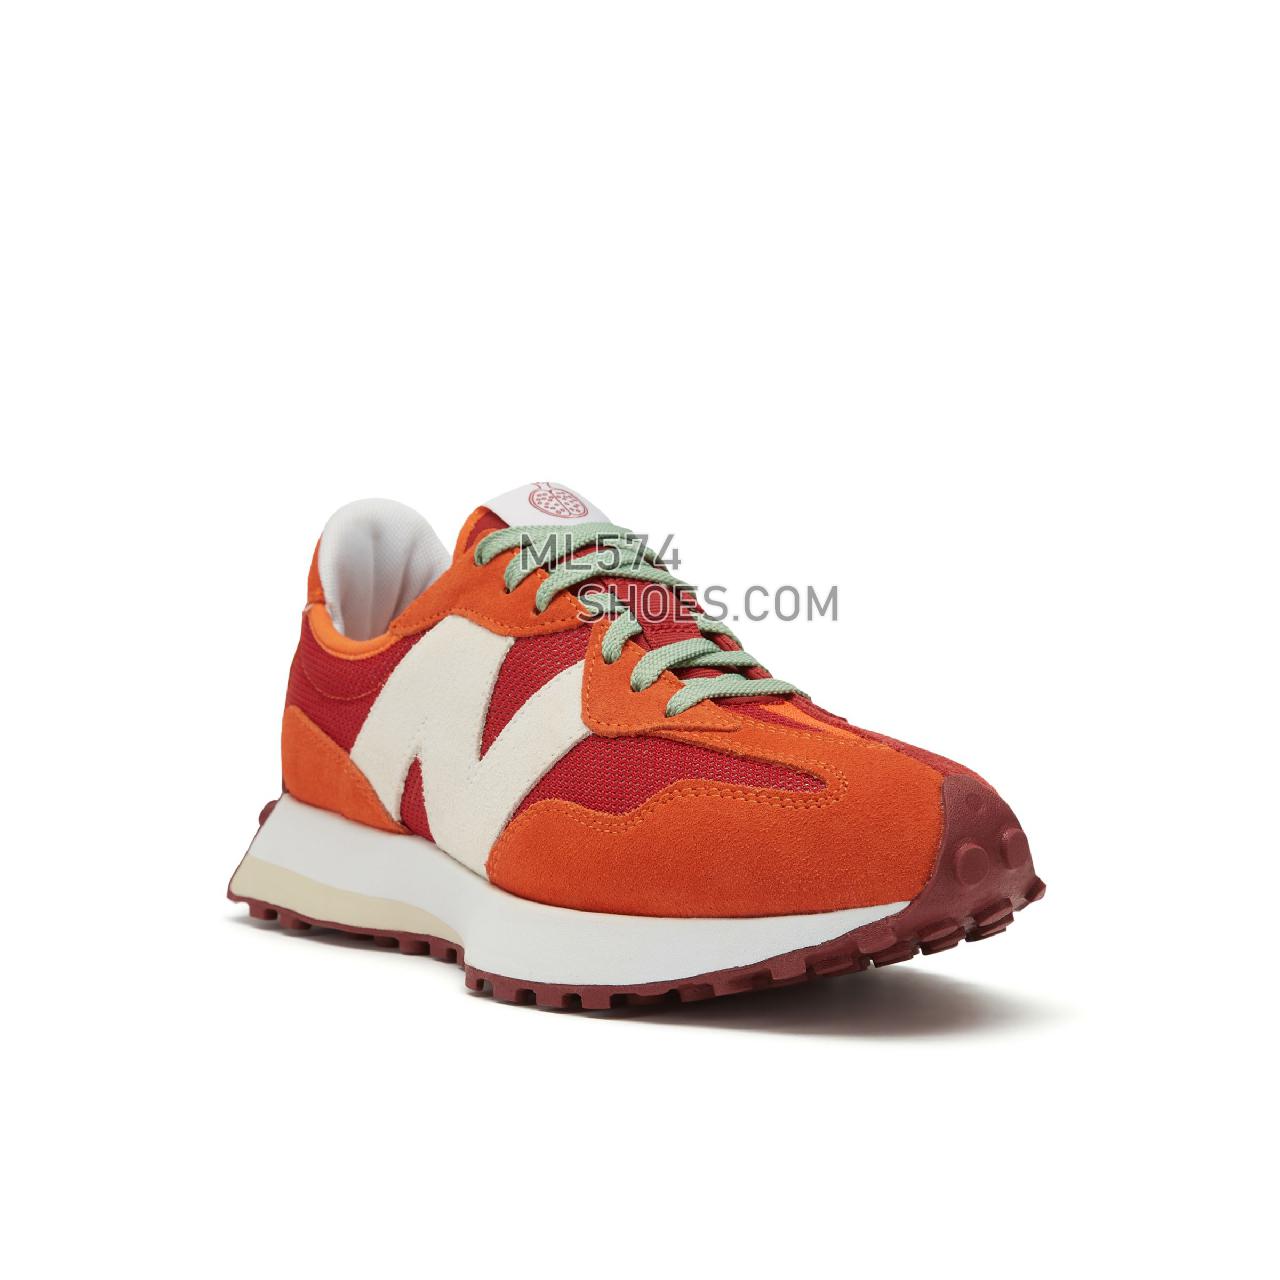 New Balance Todd Snyder 327 - Unisex Men's Women's Sport Style Sneakers - Ghost Pepper with Velocity Red - MS327TSA